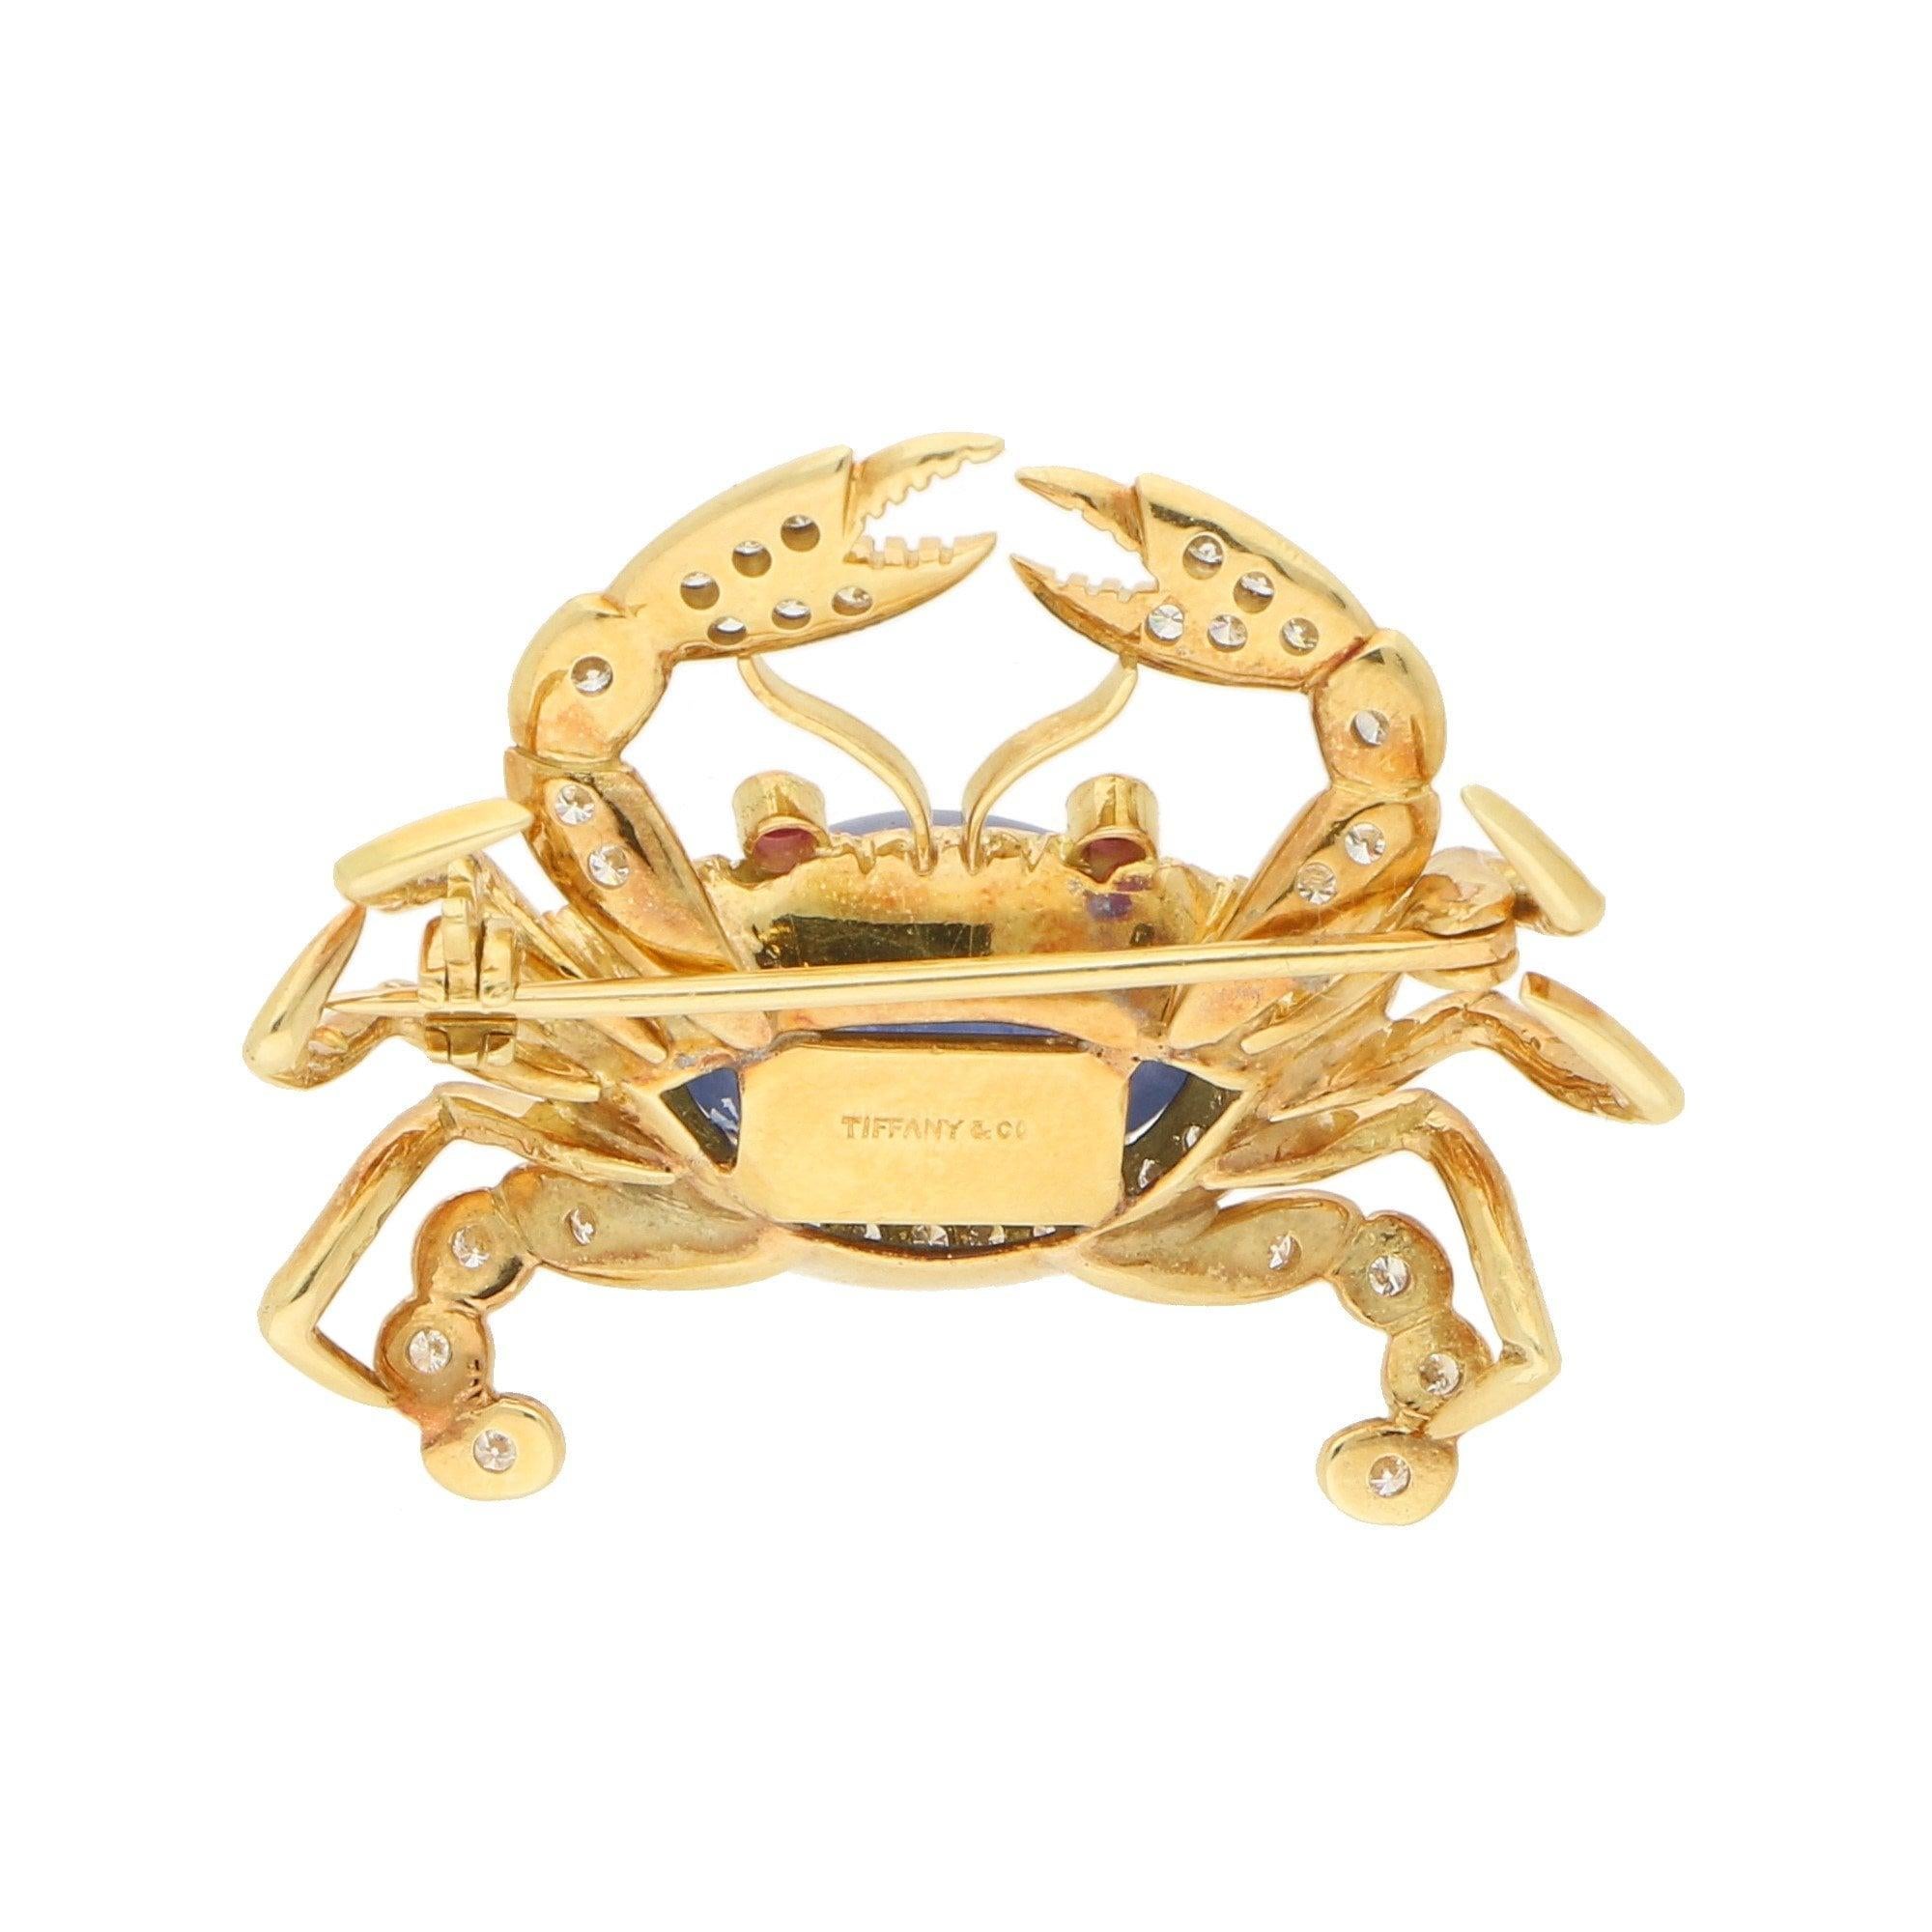 A Tiffany & Co. sapphire, diamond and ruby crab pin brooch in 18-karat yellow gold, circa 1990. The crab's body is designed with a cabochon sapphire amidst a sea of pave-set round brilliant-cut diamonds, the claws and swimming legs similarly-set